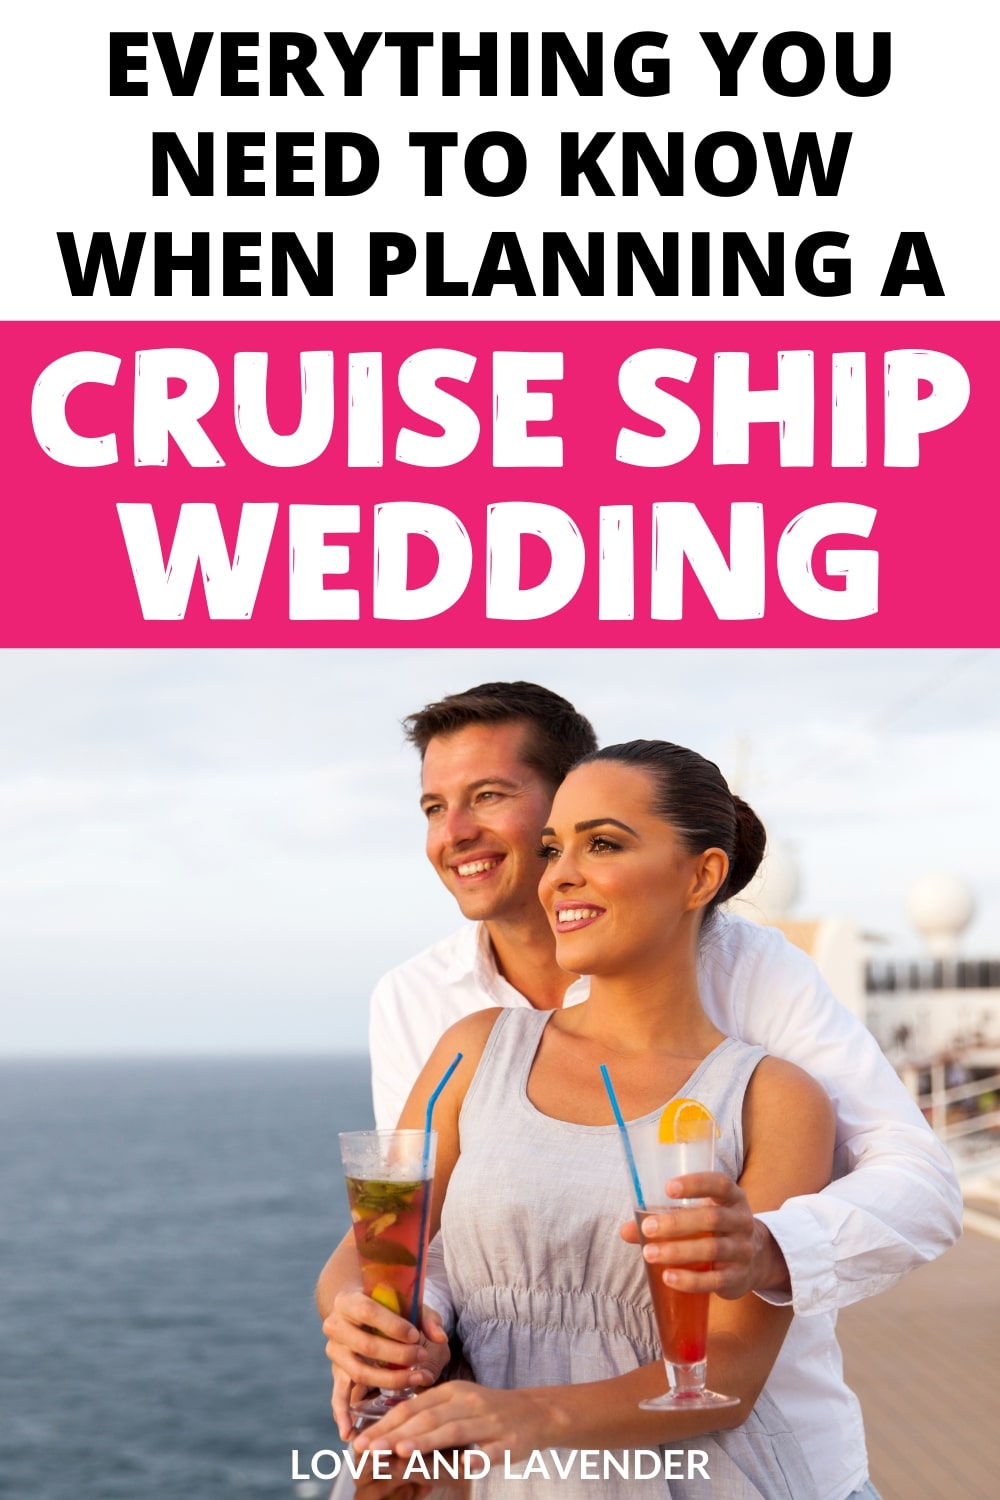 Top Tips for Planning a Cruise Ship Wedding